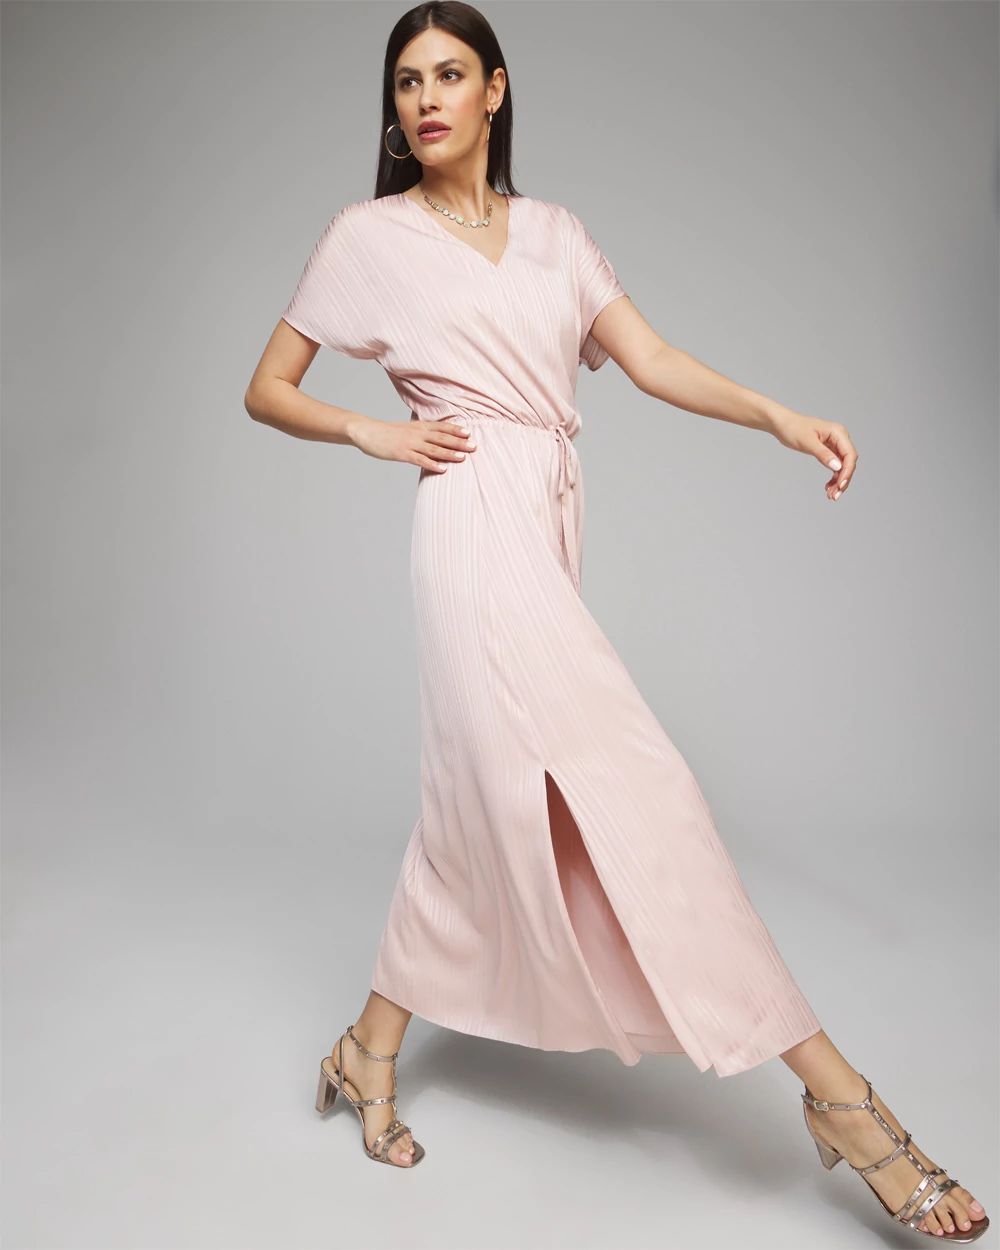 Outlet WHBM Satin Crinkle Maxi Dress click to view larger image.